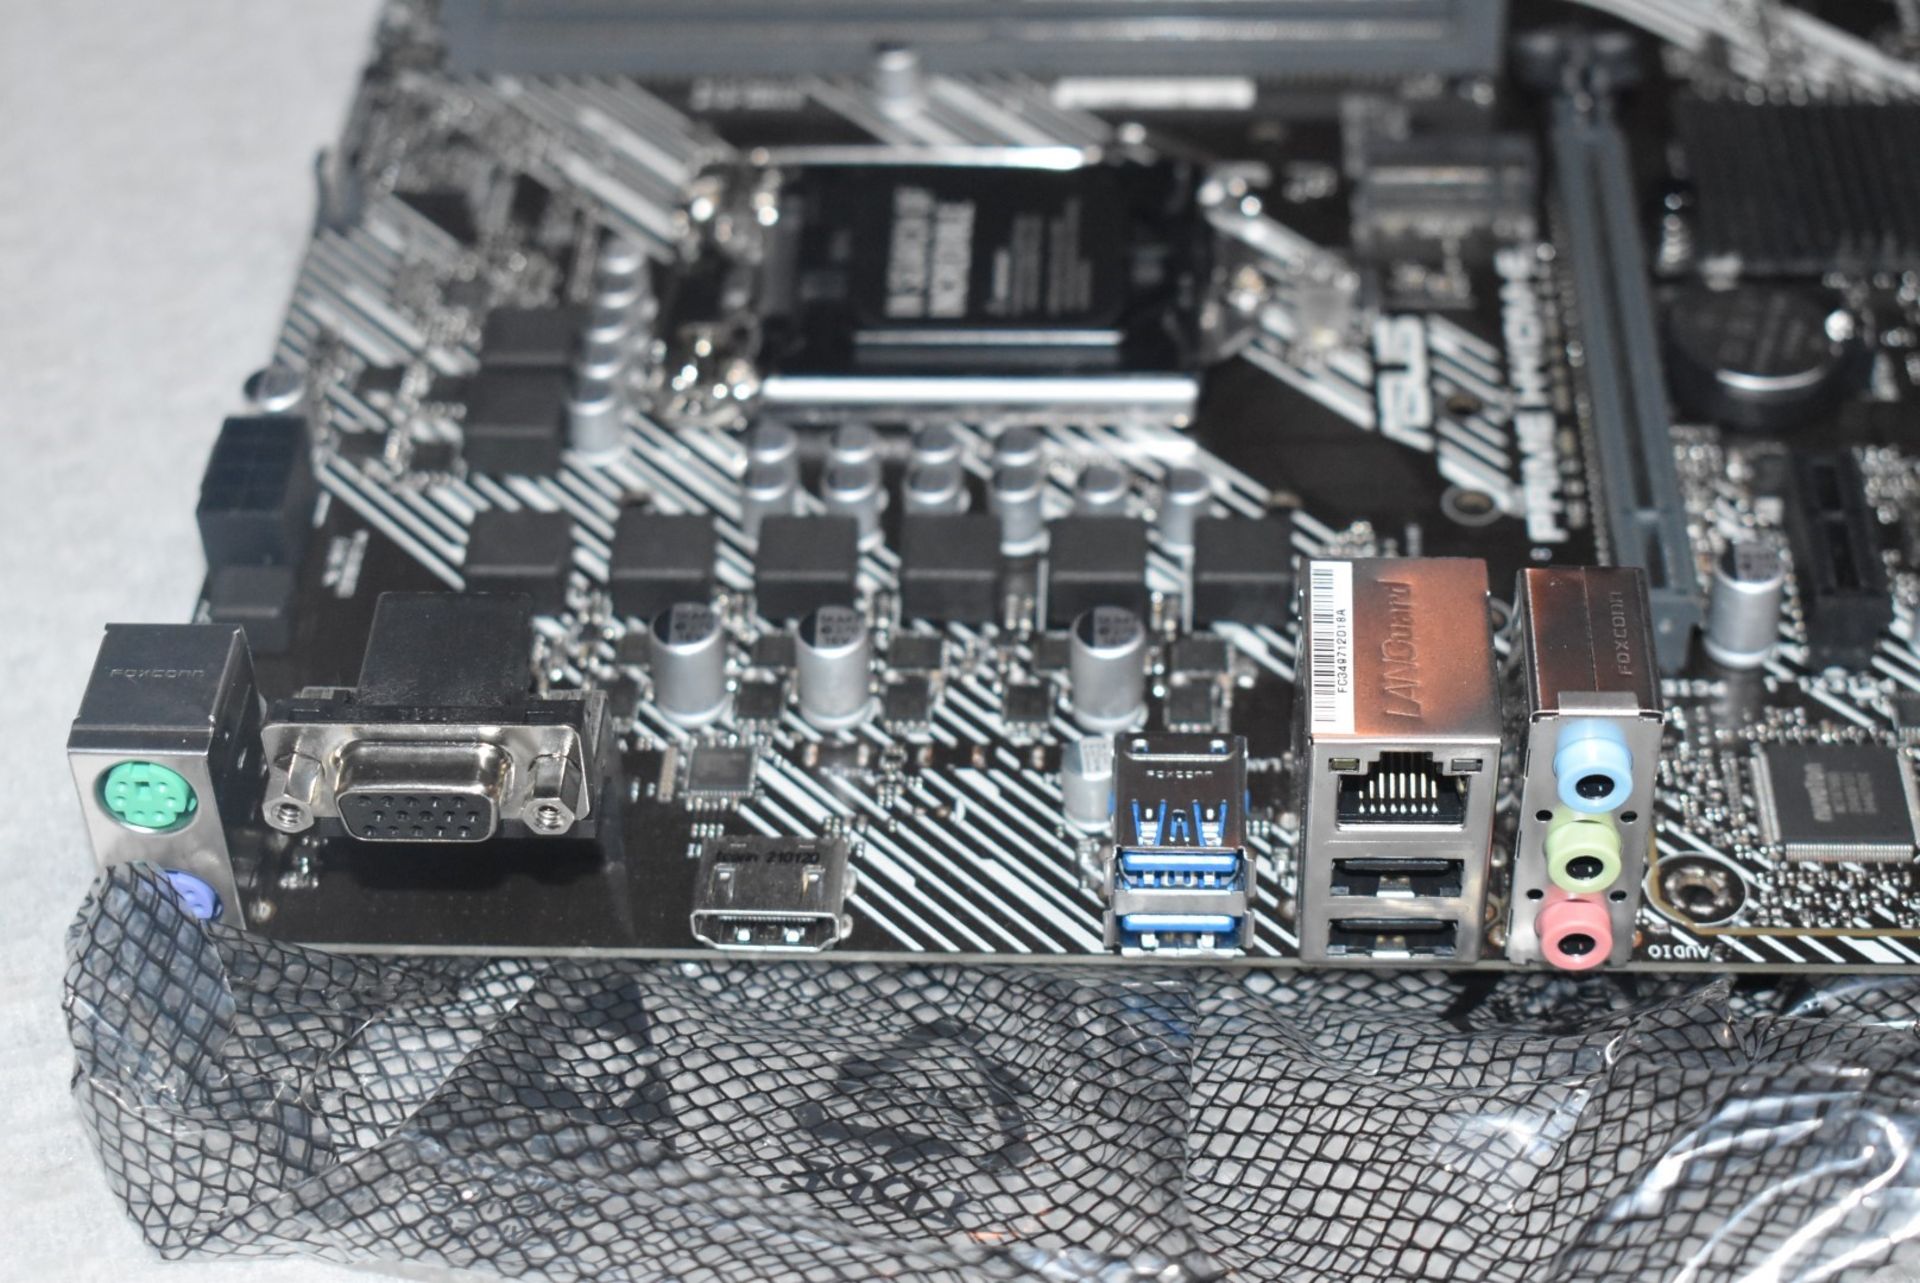 1 x Asus Prime H410M-E Intel LGA1200 Motherboard - Boxed With Accessories - Image 6 of 6